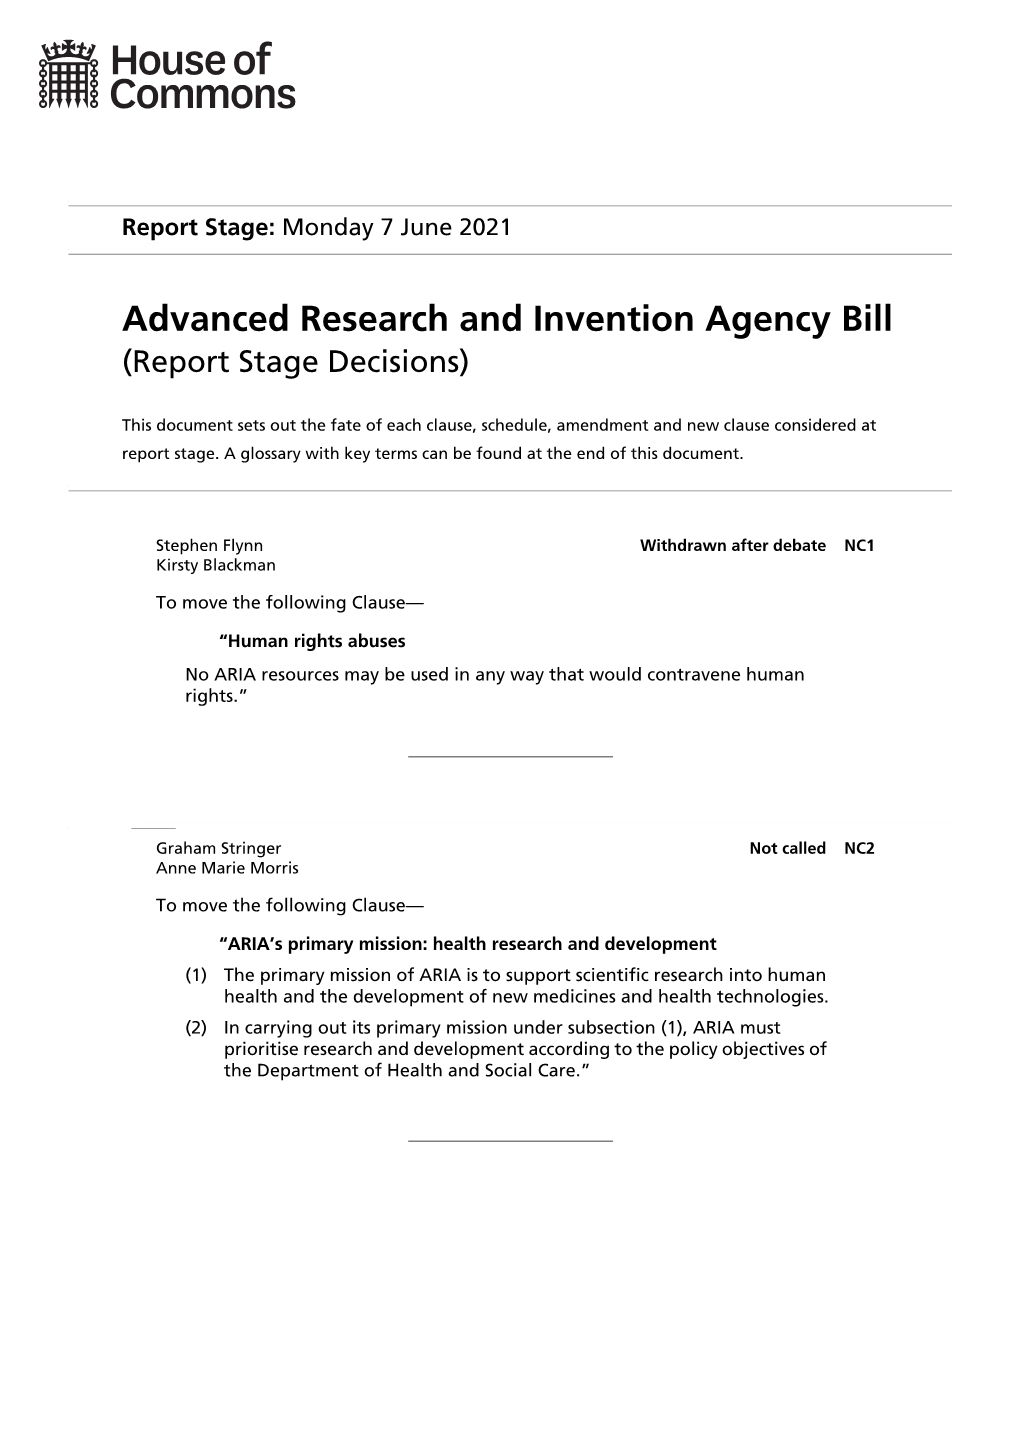 Advanced Research and Invention Agency Bill (Report Stage Decisions)